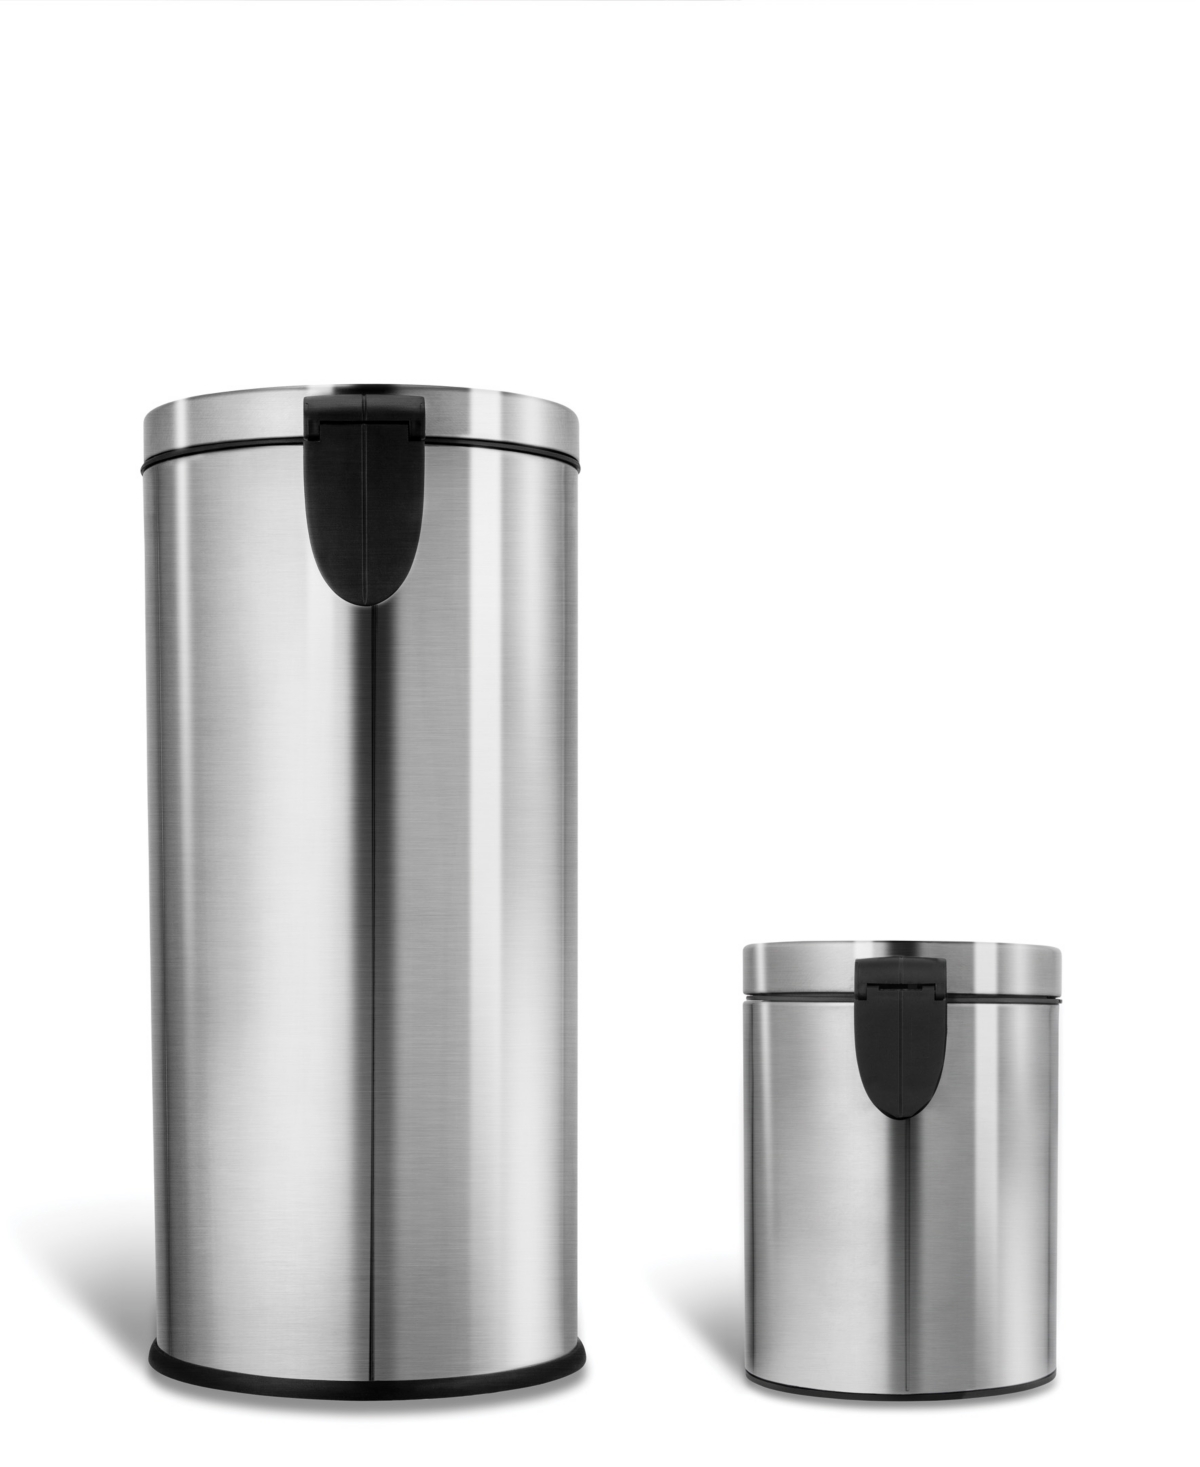 Shop Nine Stars Group Usa Inc Stainless Steel 8 Gallons 30 Liters And 1.2 Gallons 5 Liters, Step-on Trash Can Combo Set In Silver